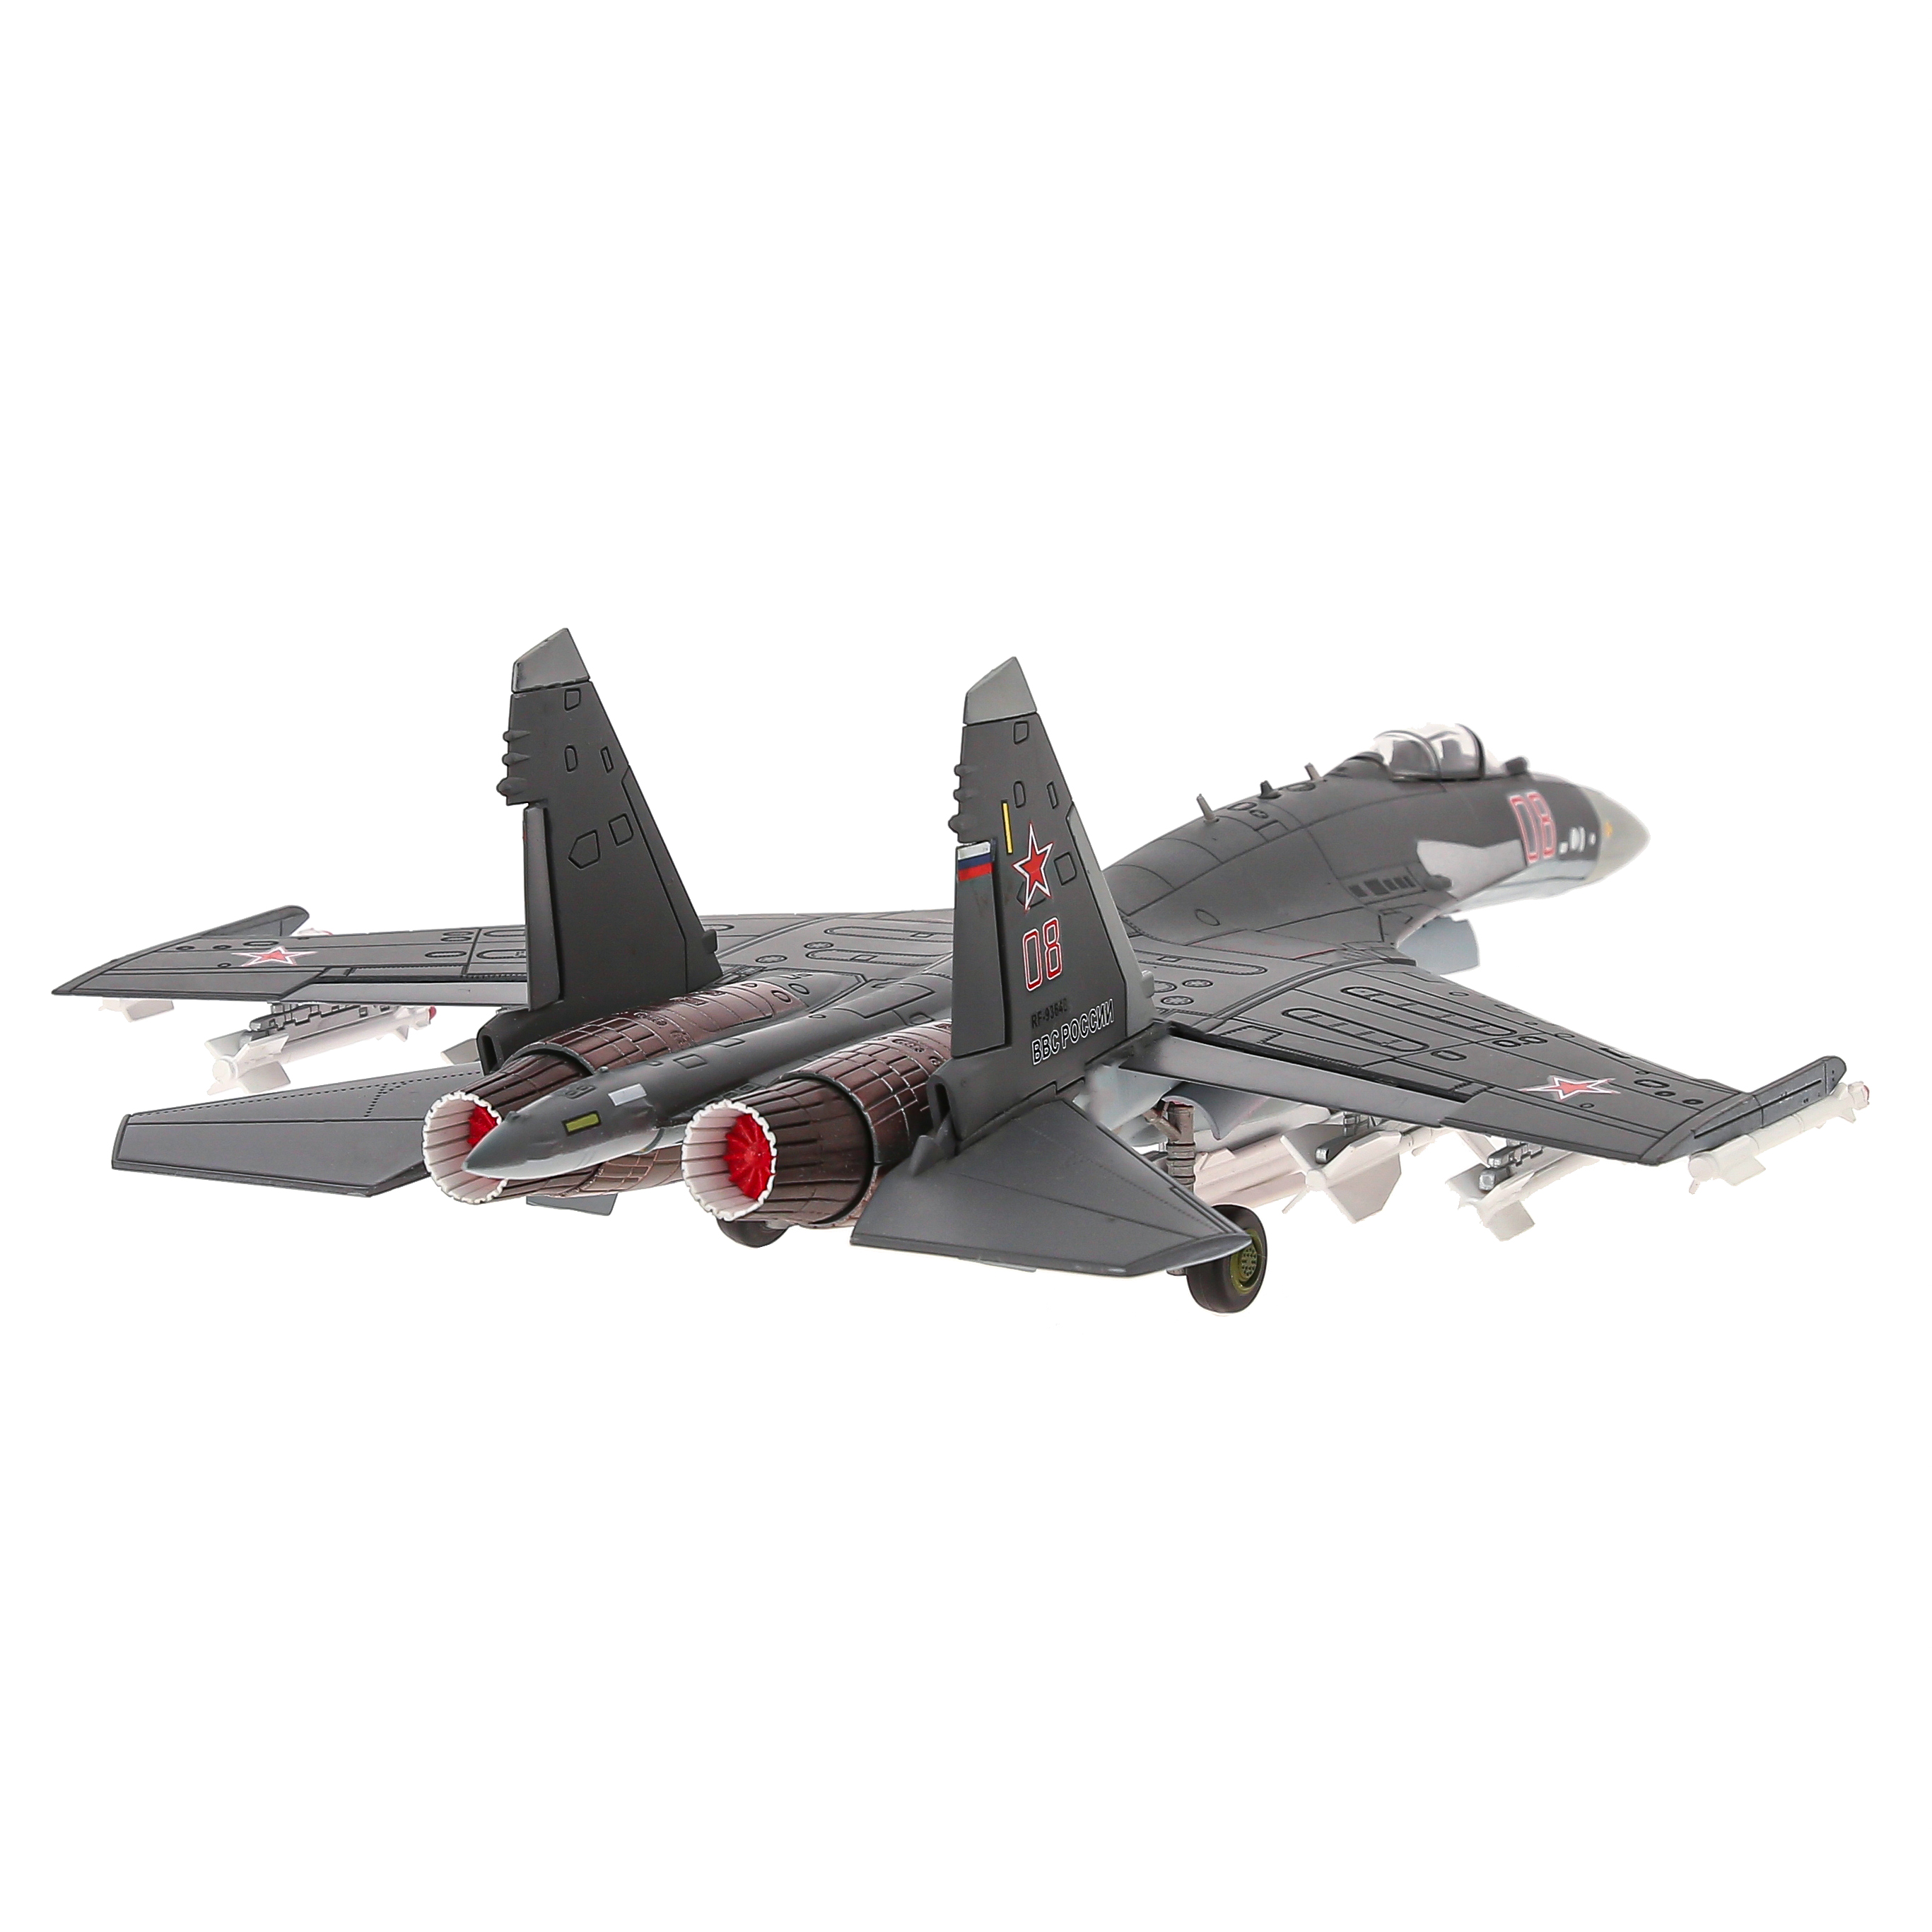    -35,  1:72 ,   32 . The model of the Russian Su-35 fighter, scale 1:72 metal, the length of the model is 32 cm. # 5 hobbyplus.ru